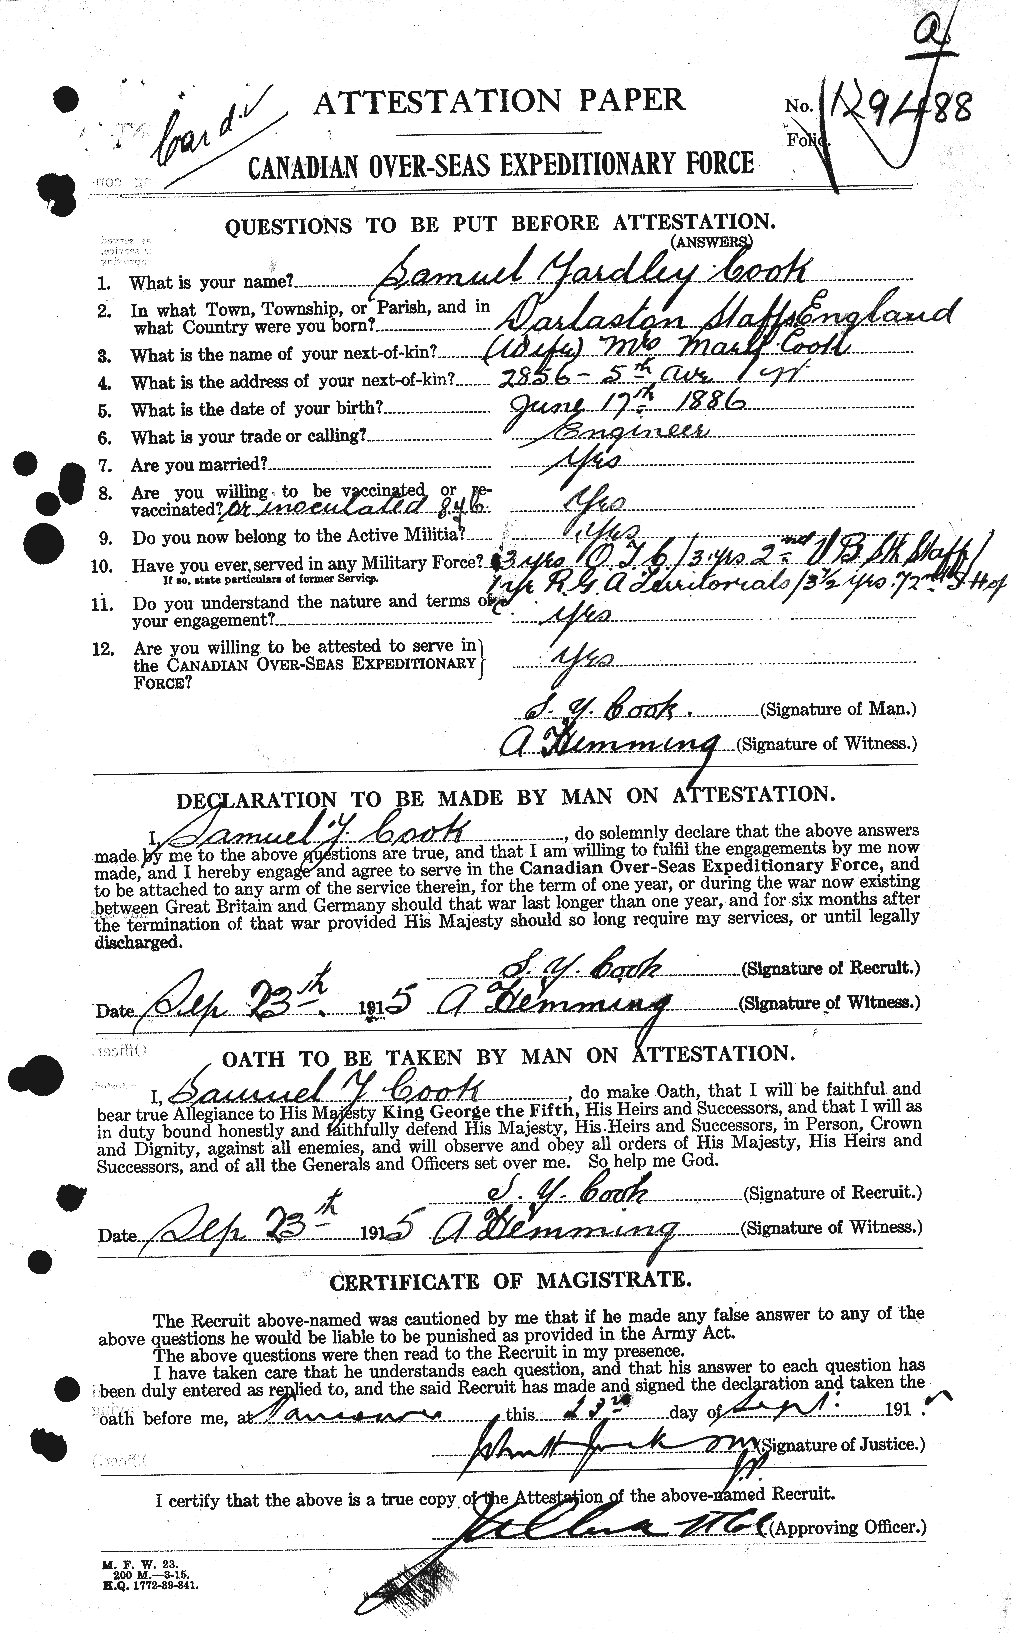 Personnel Records of the First World War - CEF 075024a